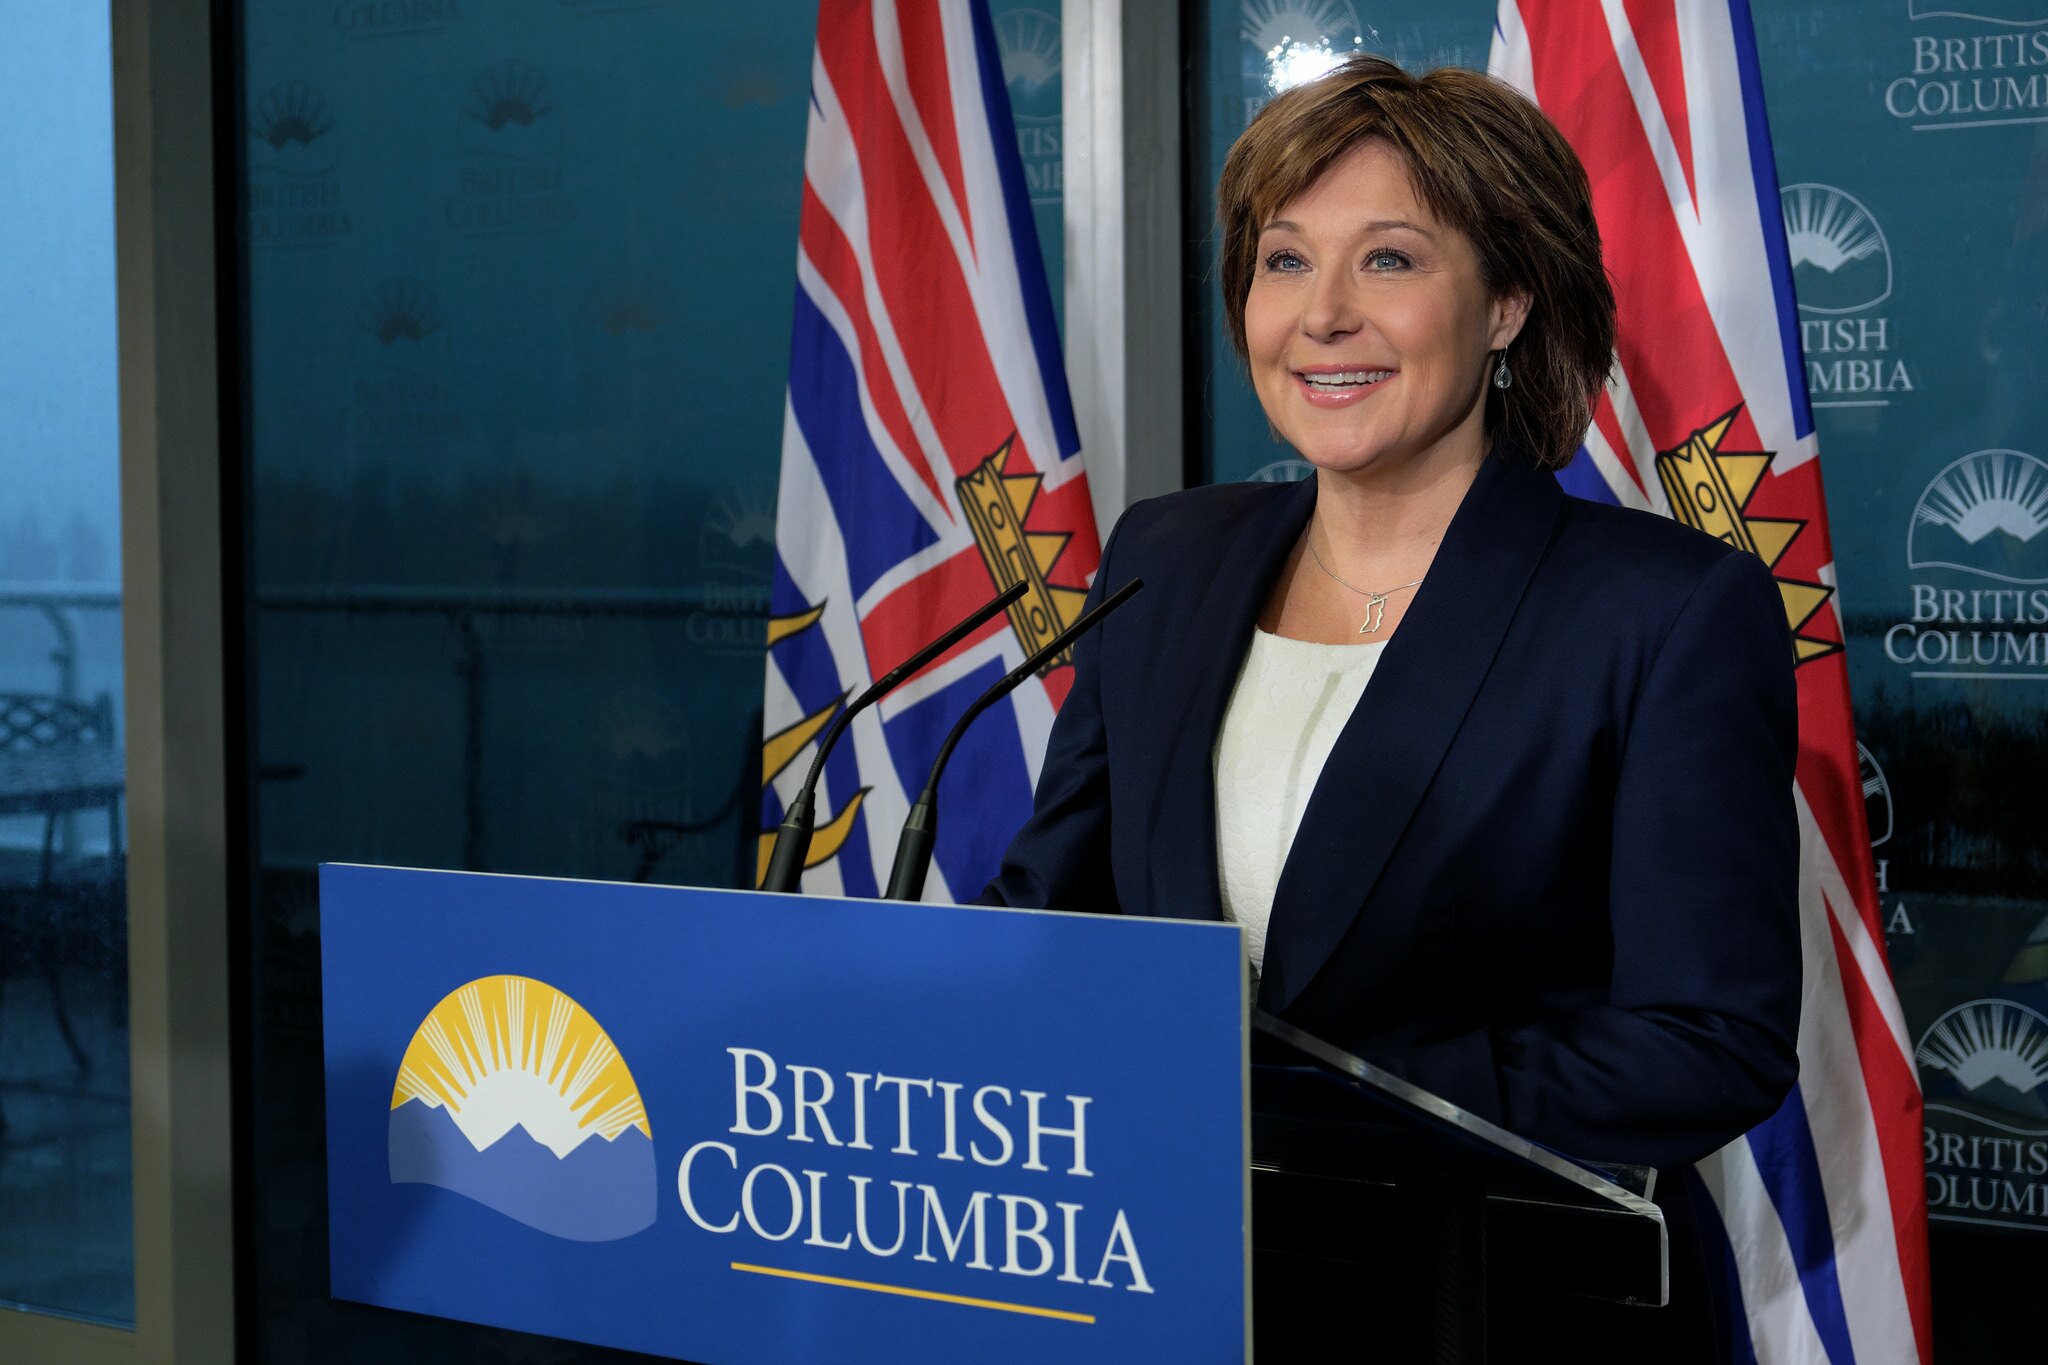 “For the past four and a half years, we have said we would measure the project against these five clear principles, and that for the expansion of any heavy oil movement through British Columbia, these conditions are the path to get to yes," said Premier Christy Clark in a press conference in November 2016 after Justin Trudeau approved the project. Province of British Columbia